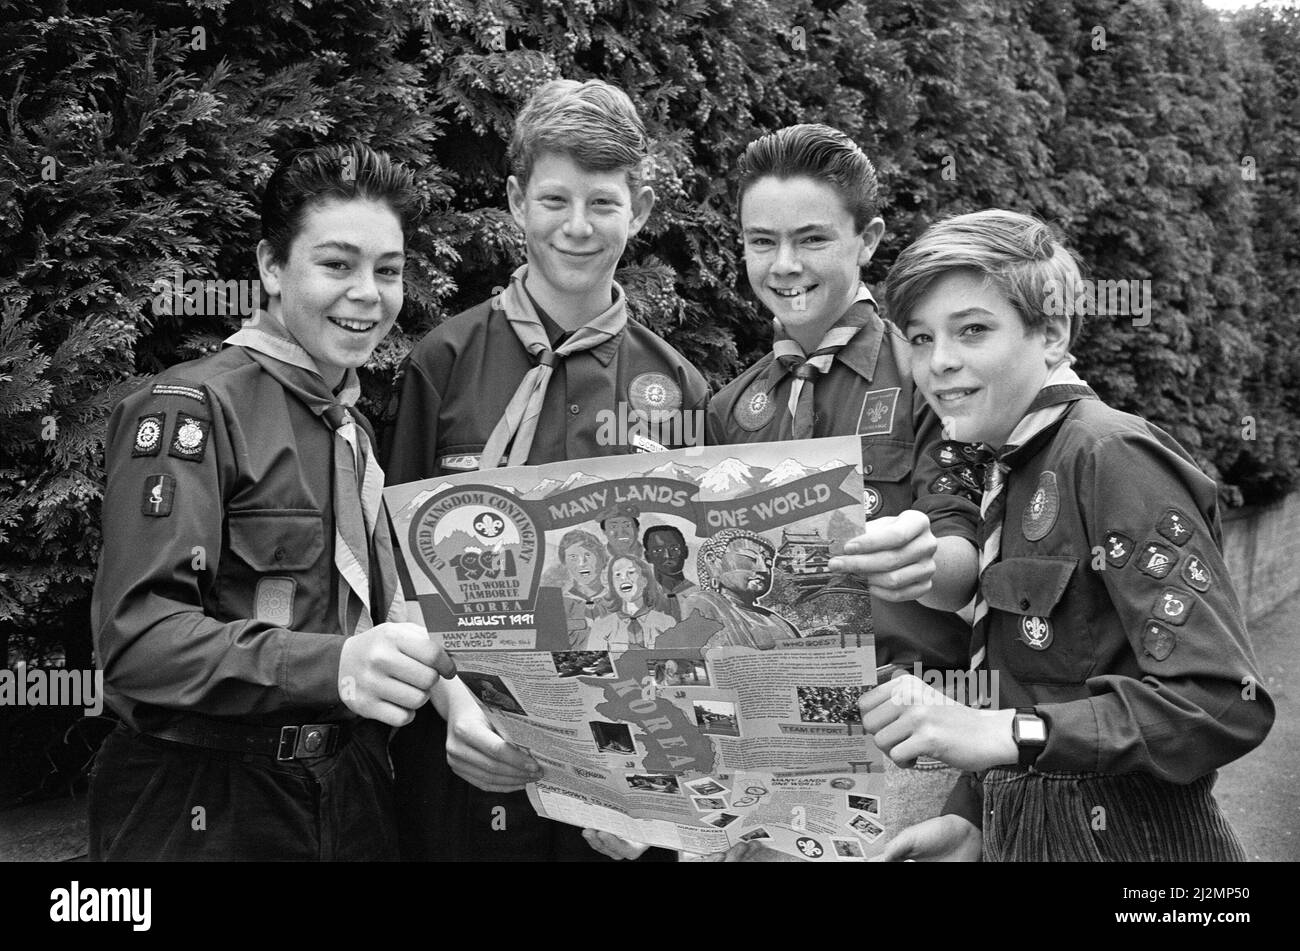 Look out world, here we come... intrepid globetrotters from the Scout movement, who are out to raise £8,000 to finance a trip to Korea for the 17th World Jamboree in 1991. They are from left: Richard Beaumont, James Ellam, Graeme Murray, and Robin Ferguson. The scouts each have to raise £2,000 for the three-week trip which will include seven nights in Japan and 14 under canvas in the Sorek National Park, Korea, where the jamboree will take place. The youngsters have decided to pool their wits are jointly raising the funds, instead of individually. Future money spinners include a chariot race a Stock Photo